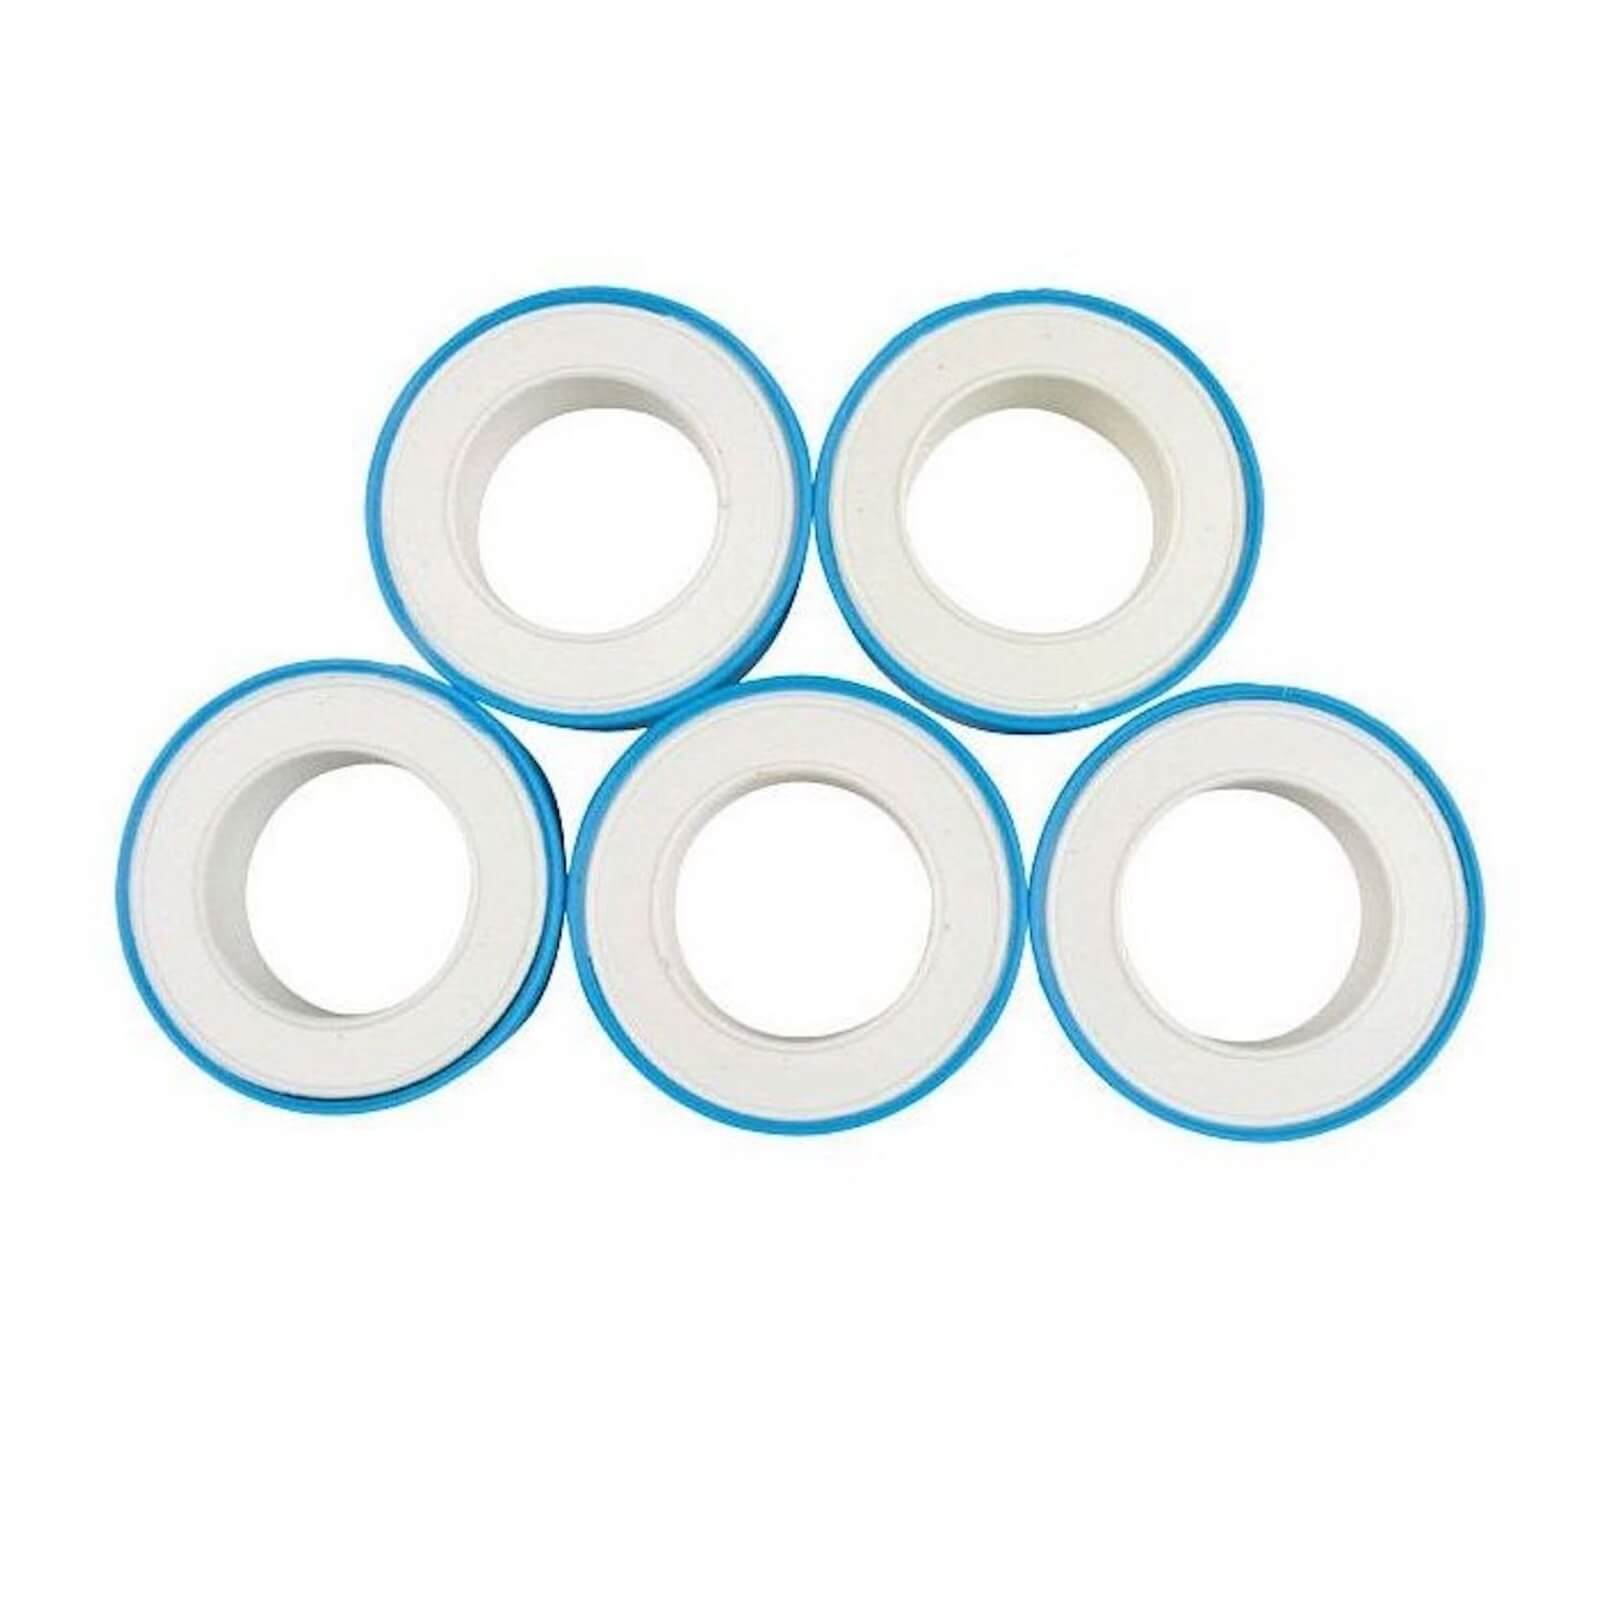 PTFE Jointing Tape - 5 Pack